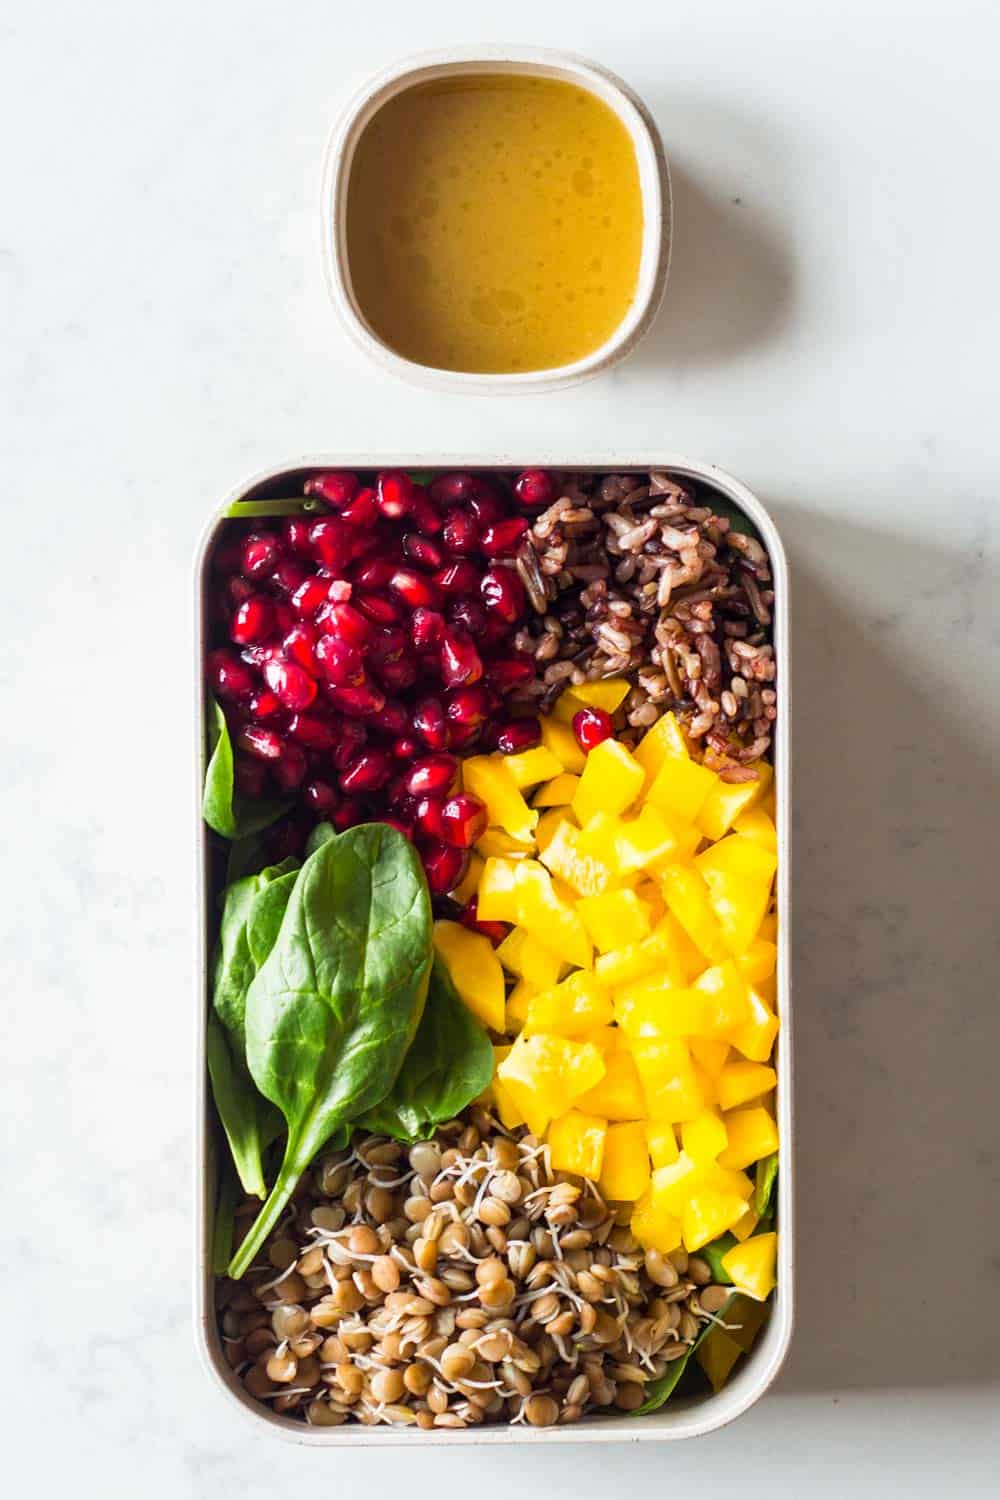 Meal prep container filled with baby spinach, cooked sprouted lentils, cooked wild rice blend, pomegranate seeds, chopped bell pepper and a homemade honey-mustard salad dressing on the side.